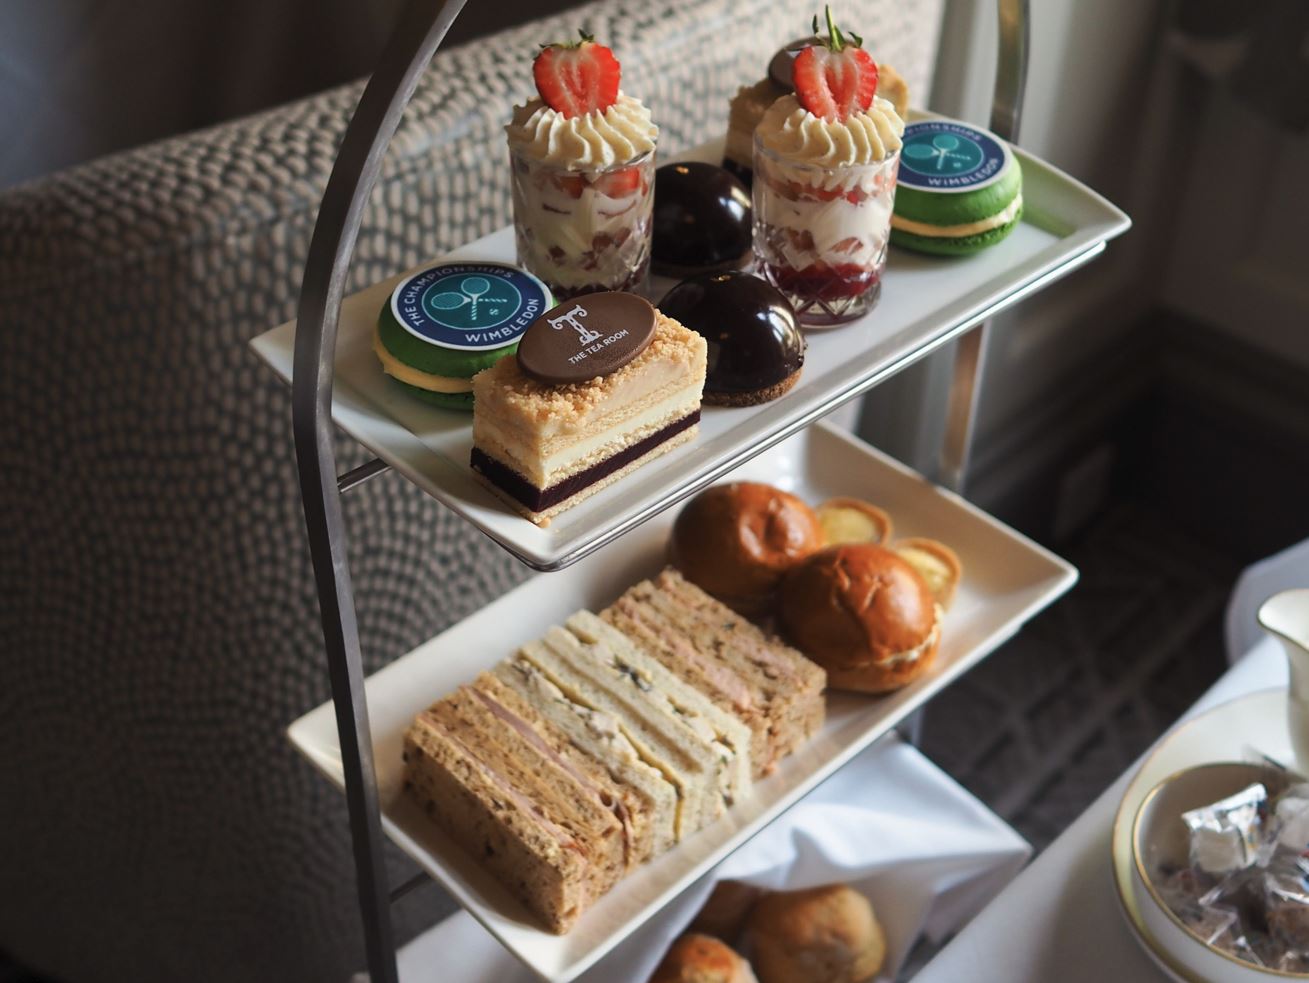 The Wimbledon-themed afternoon tea and cocktails at The Midland.